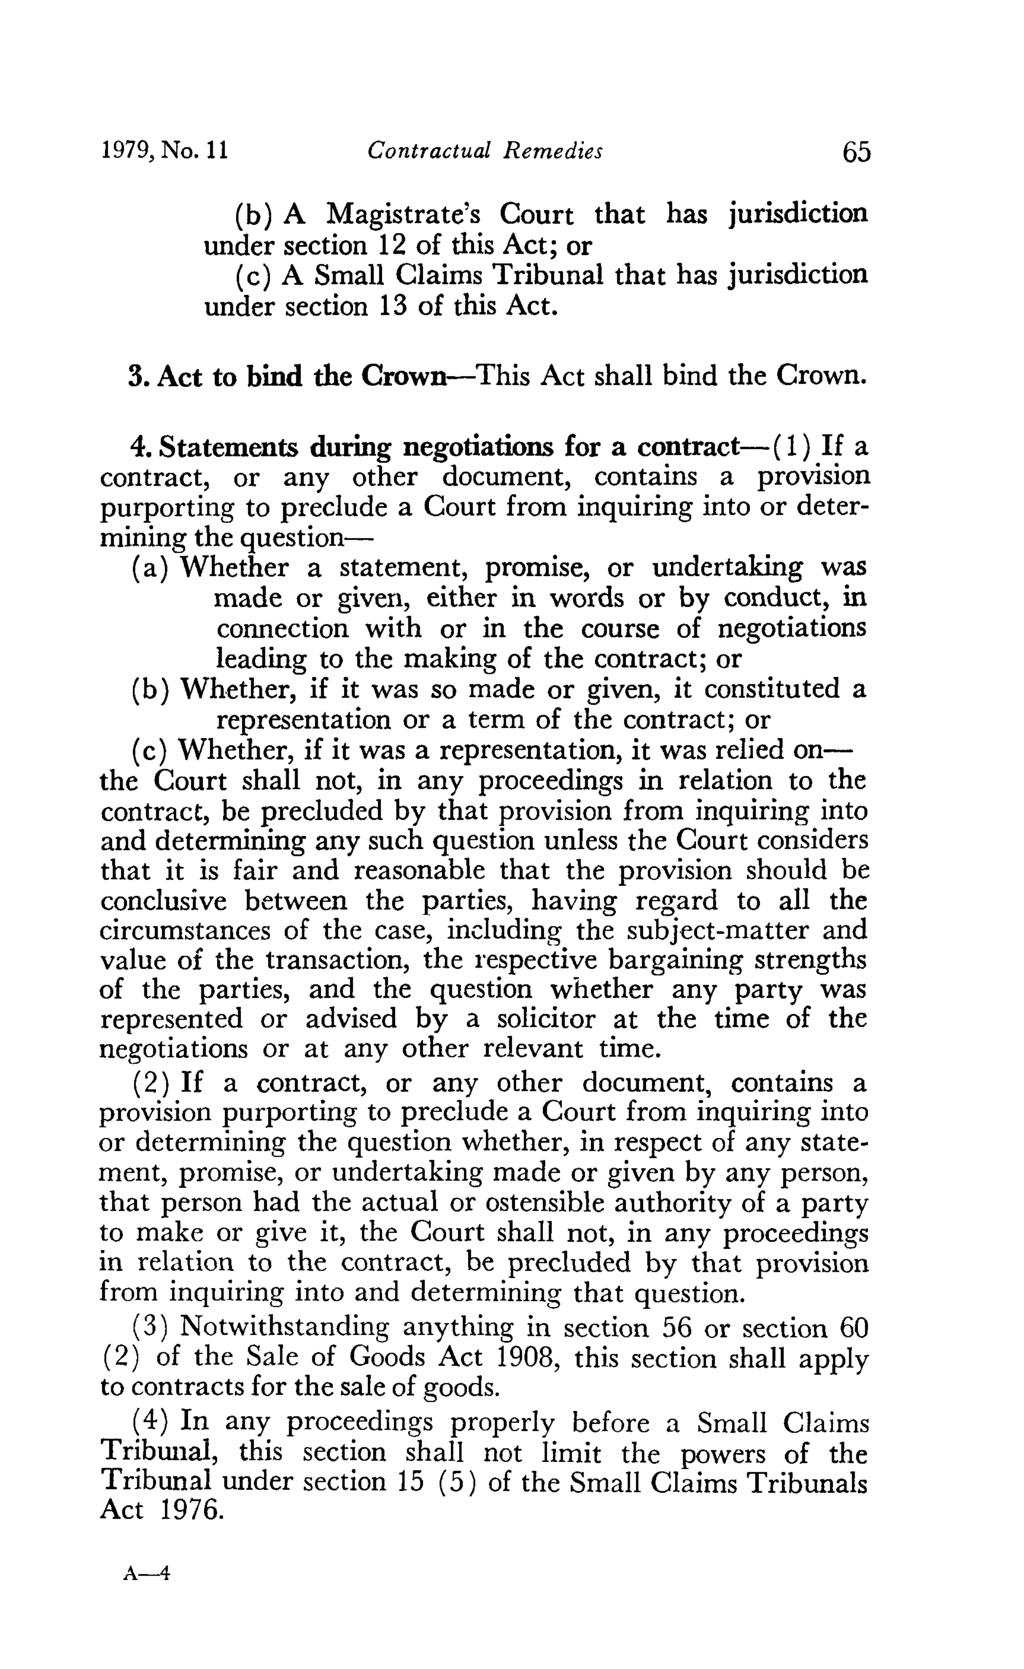 1979, No. 11 Contractual Remedies 65 (b) A Magistrate's Court that has jurisdiction under section 12 of this Act; or (c) A Small Claims Tribunal that has jurisdiction under section 13 of this Act. 3.